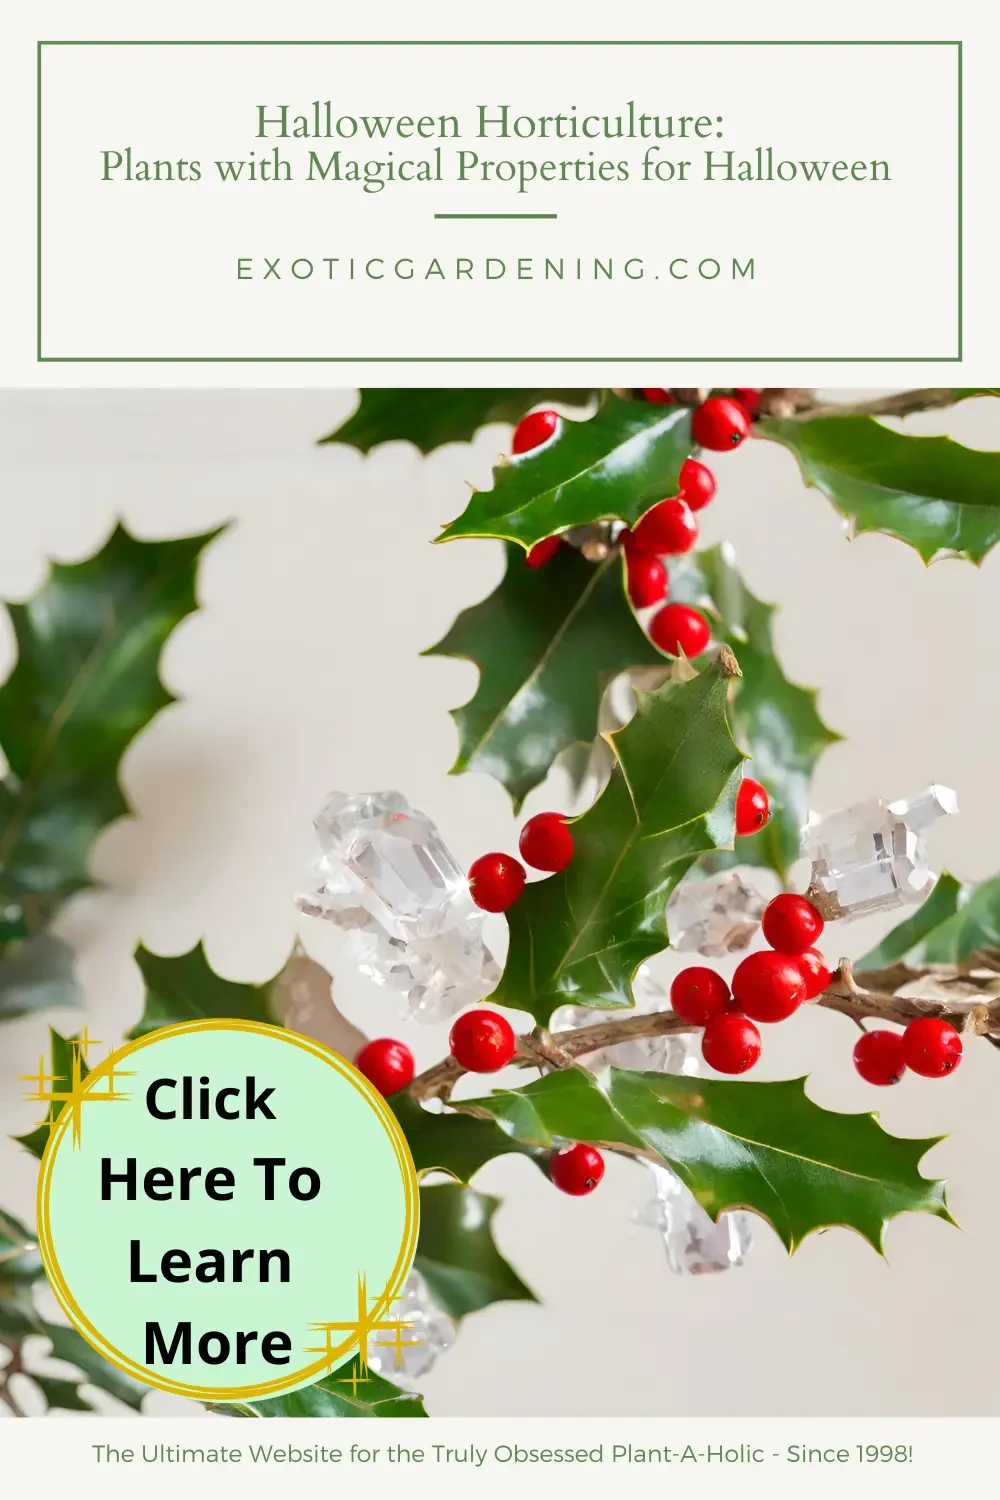 Holly Berries and Protective Crystals: A vibrant holly branch next to protective crystals, reflecting the dual purpose of holly as a guardian and a symbol of life.